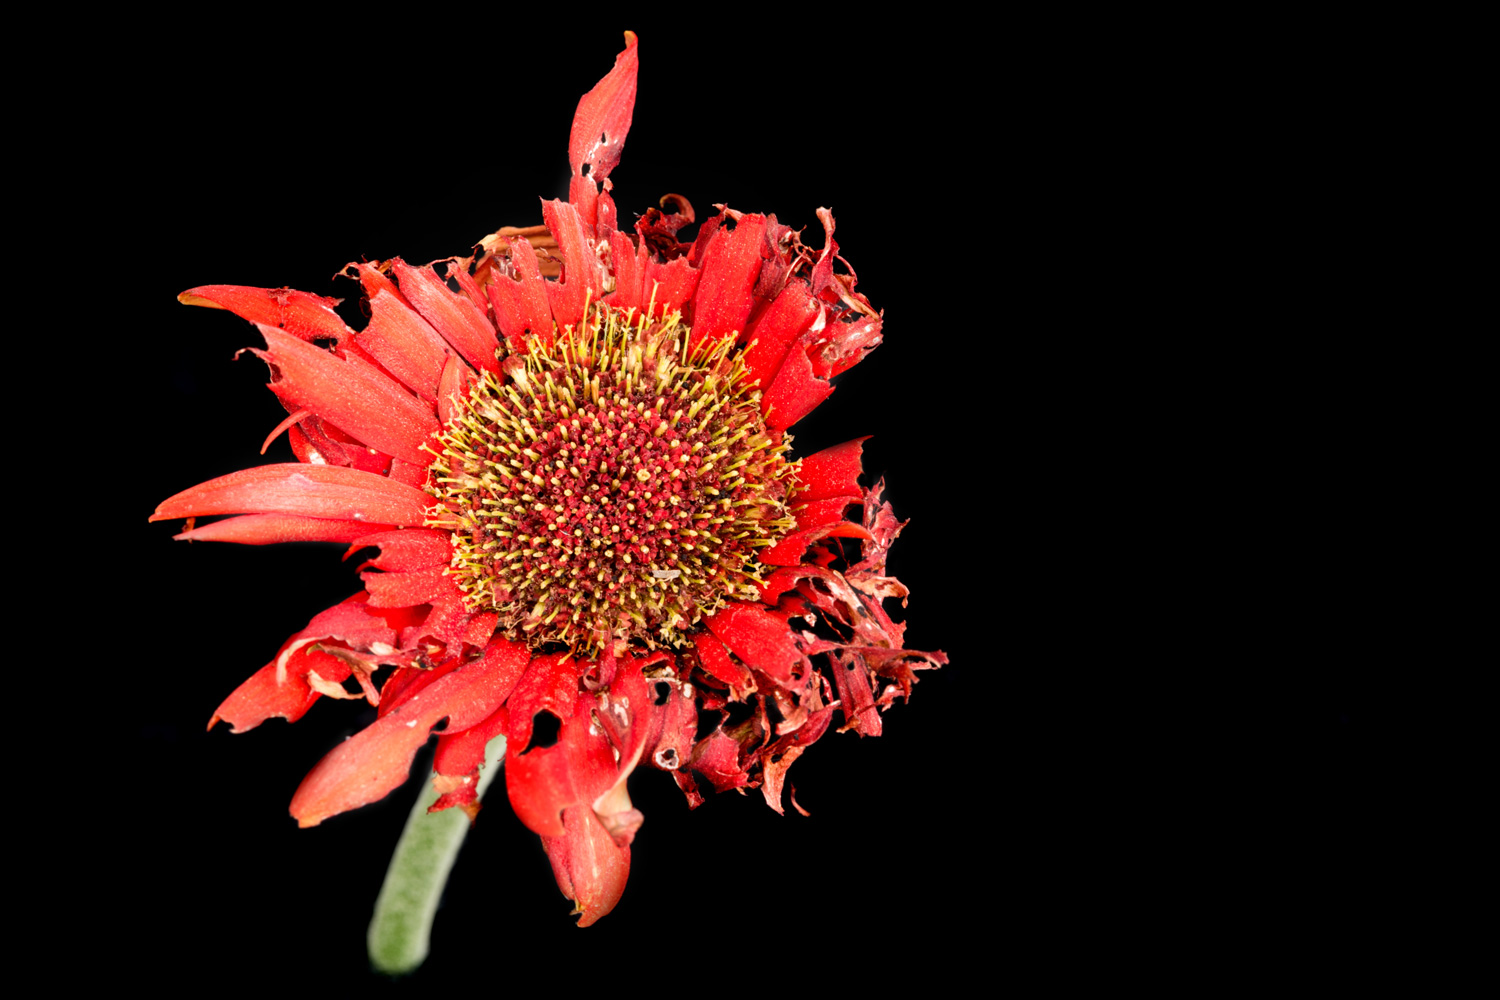 Beautiful Red dahlia withered flower with petals ready to fall, isolated on a black background